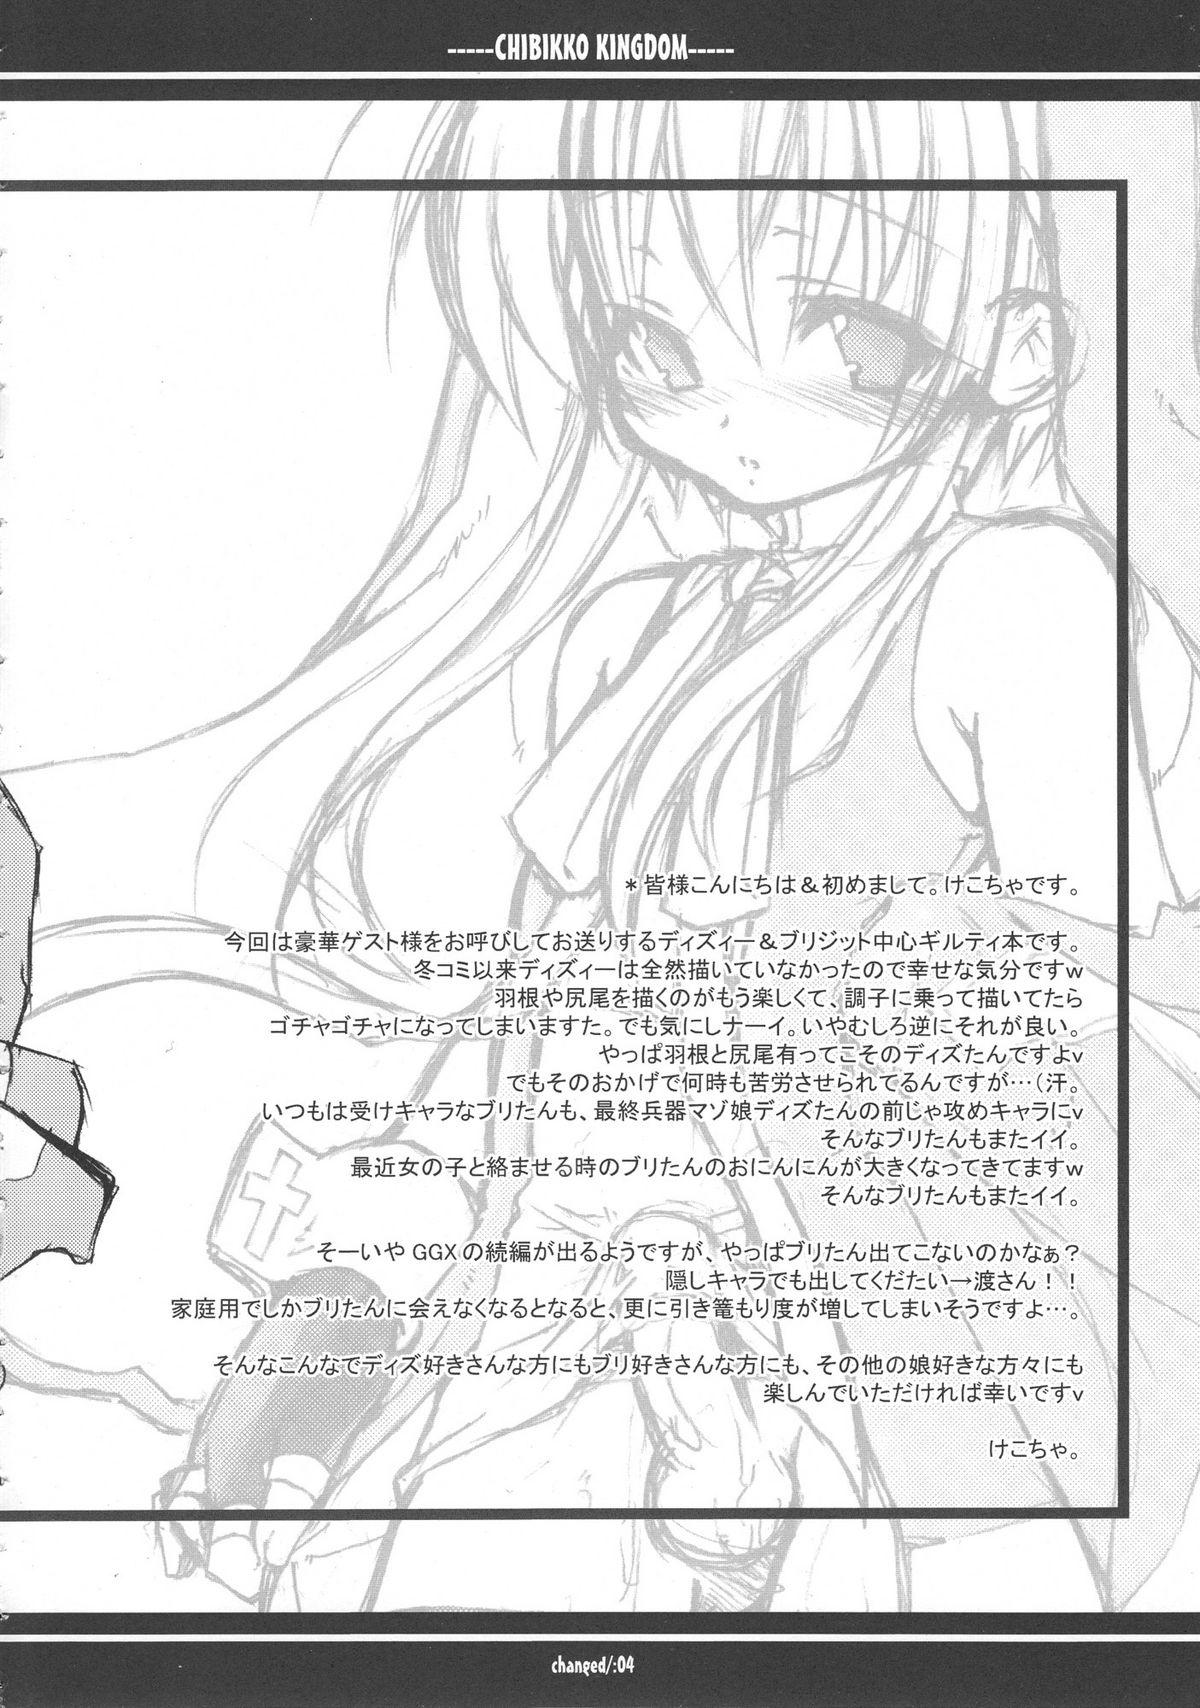 Swinger Changed - Guilty gear Breasts - Page 8